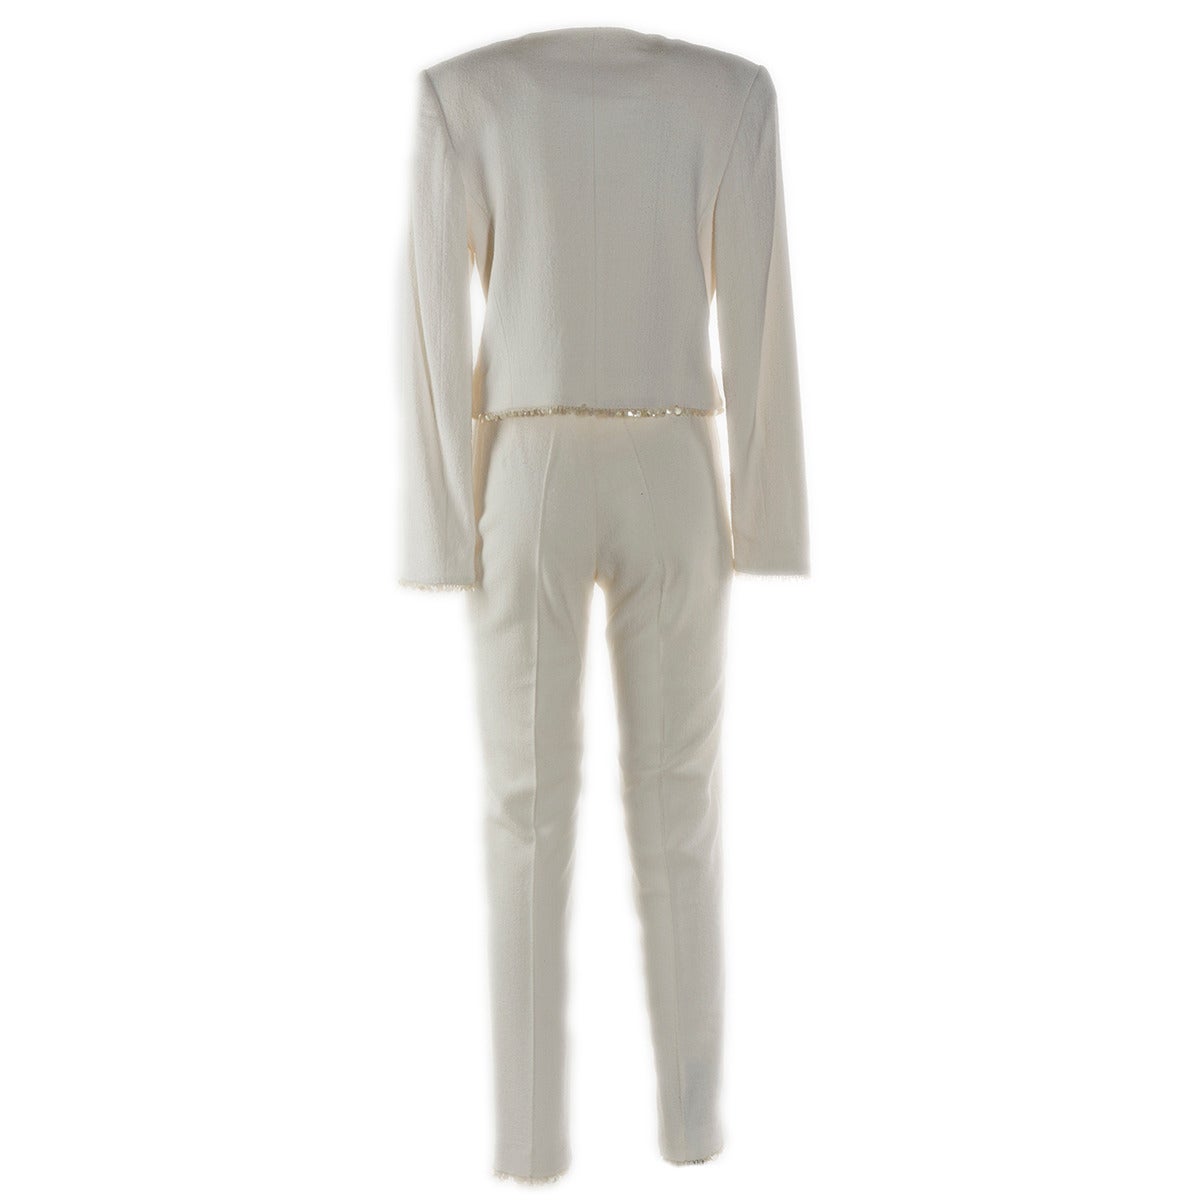 Wonderful and very elegant Escada by Margaretha Ley pant suit
White color
Embroidered with white paillettes
One single transparent button on top
Rayon
Size 6 U.S.
Made in Germany
Worldwide express shipping included in the price !